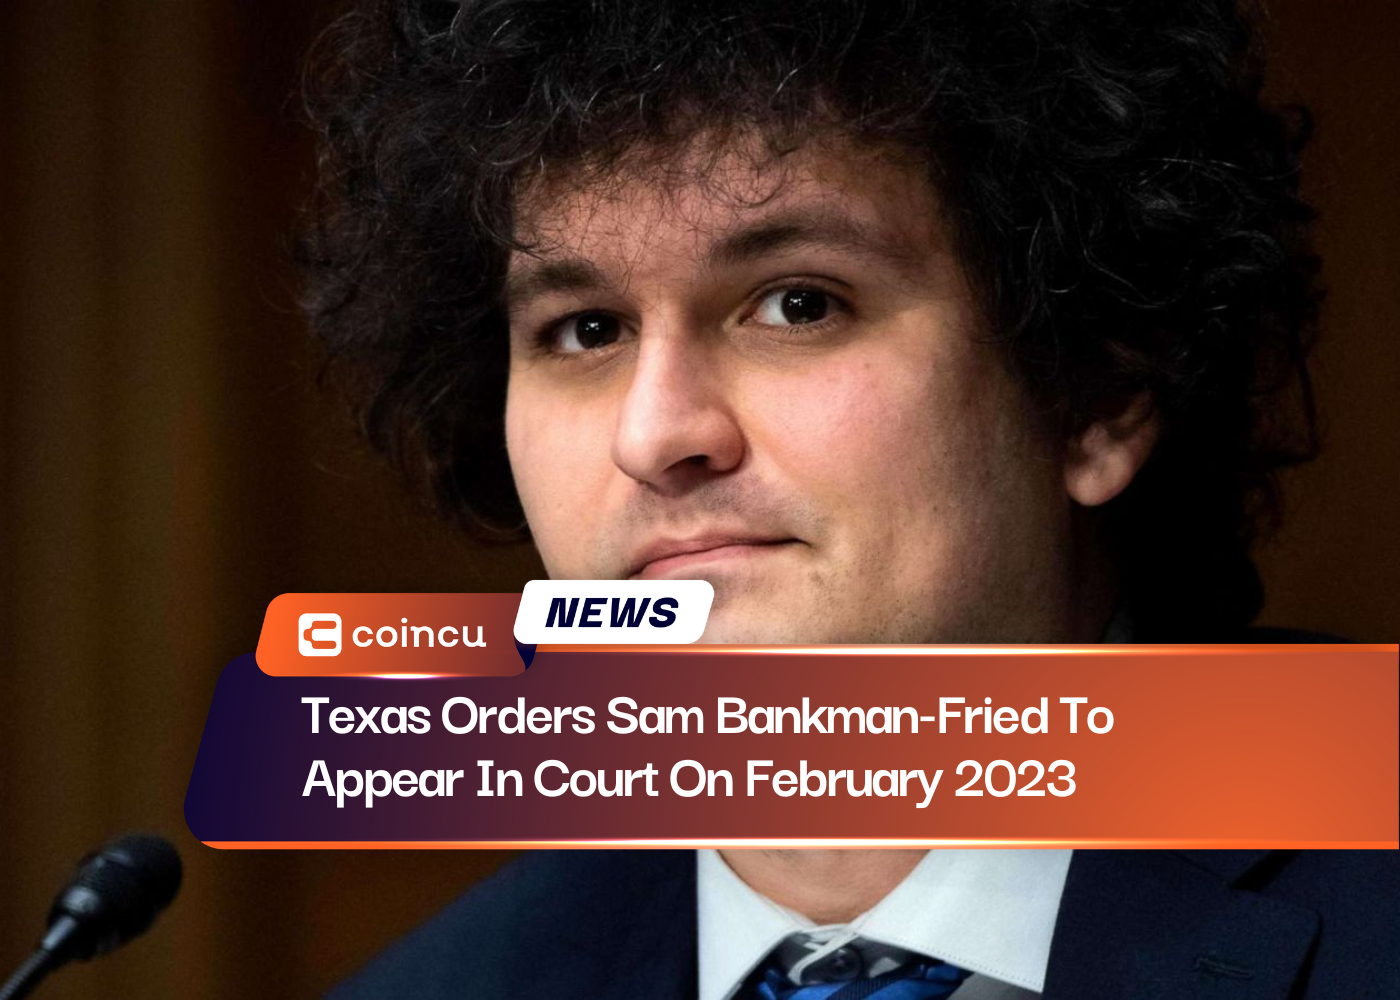 Texas Orders Sam Bankman-Fried To Appear In Court On February 2023